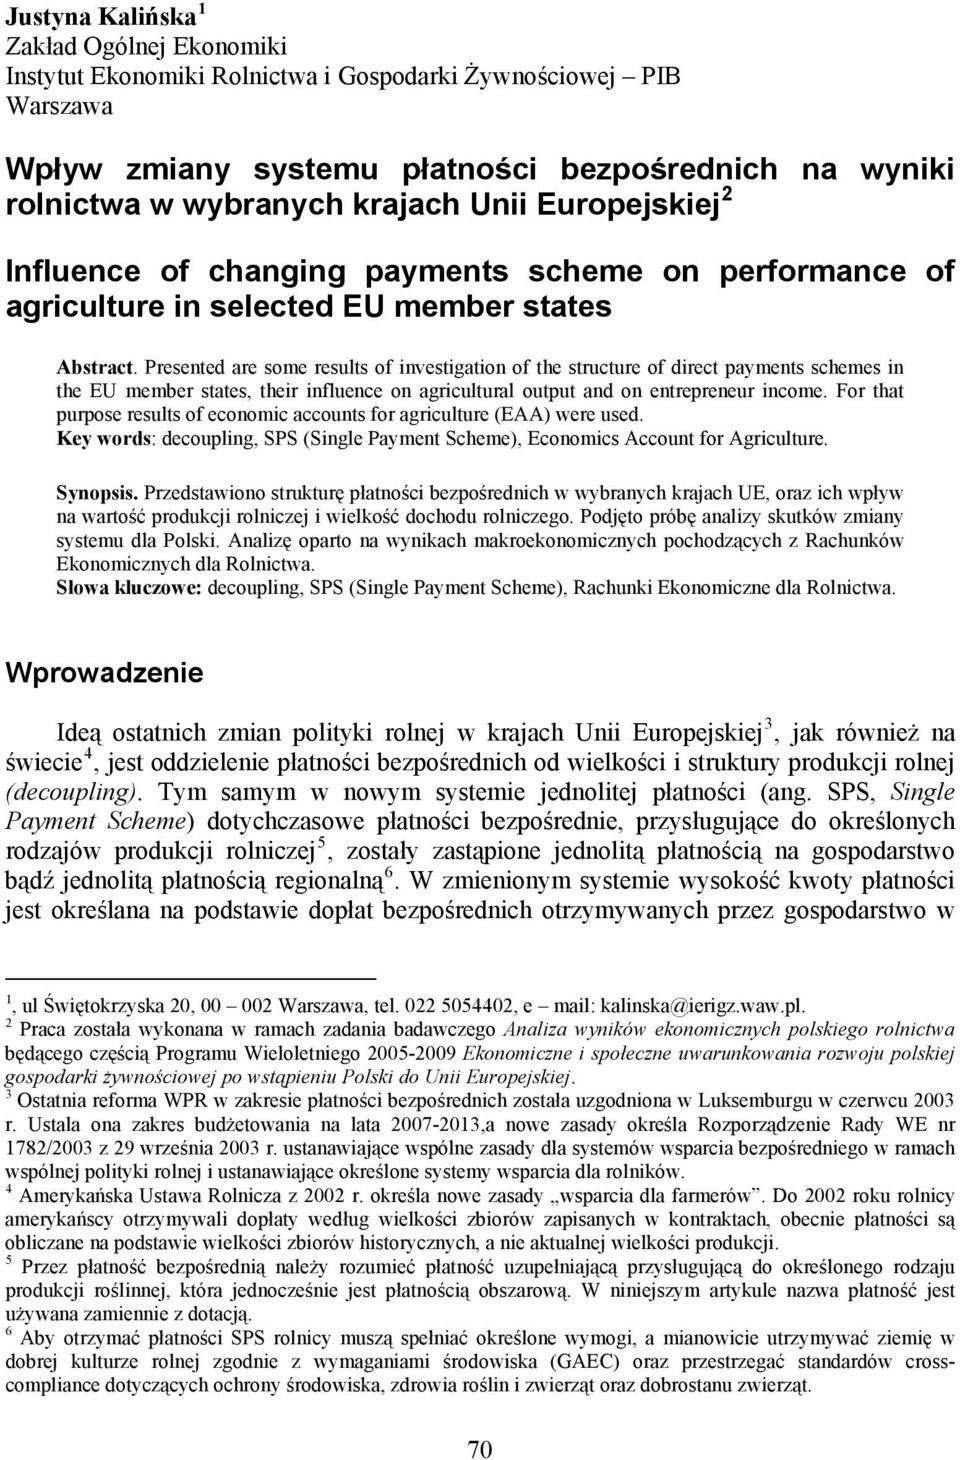 Presented are some results of investigation of the structure of direct payments schemes in the EU member states, their influence on agricultural output and on entrepreneur income.